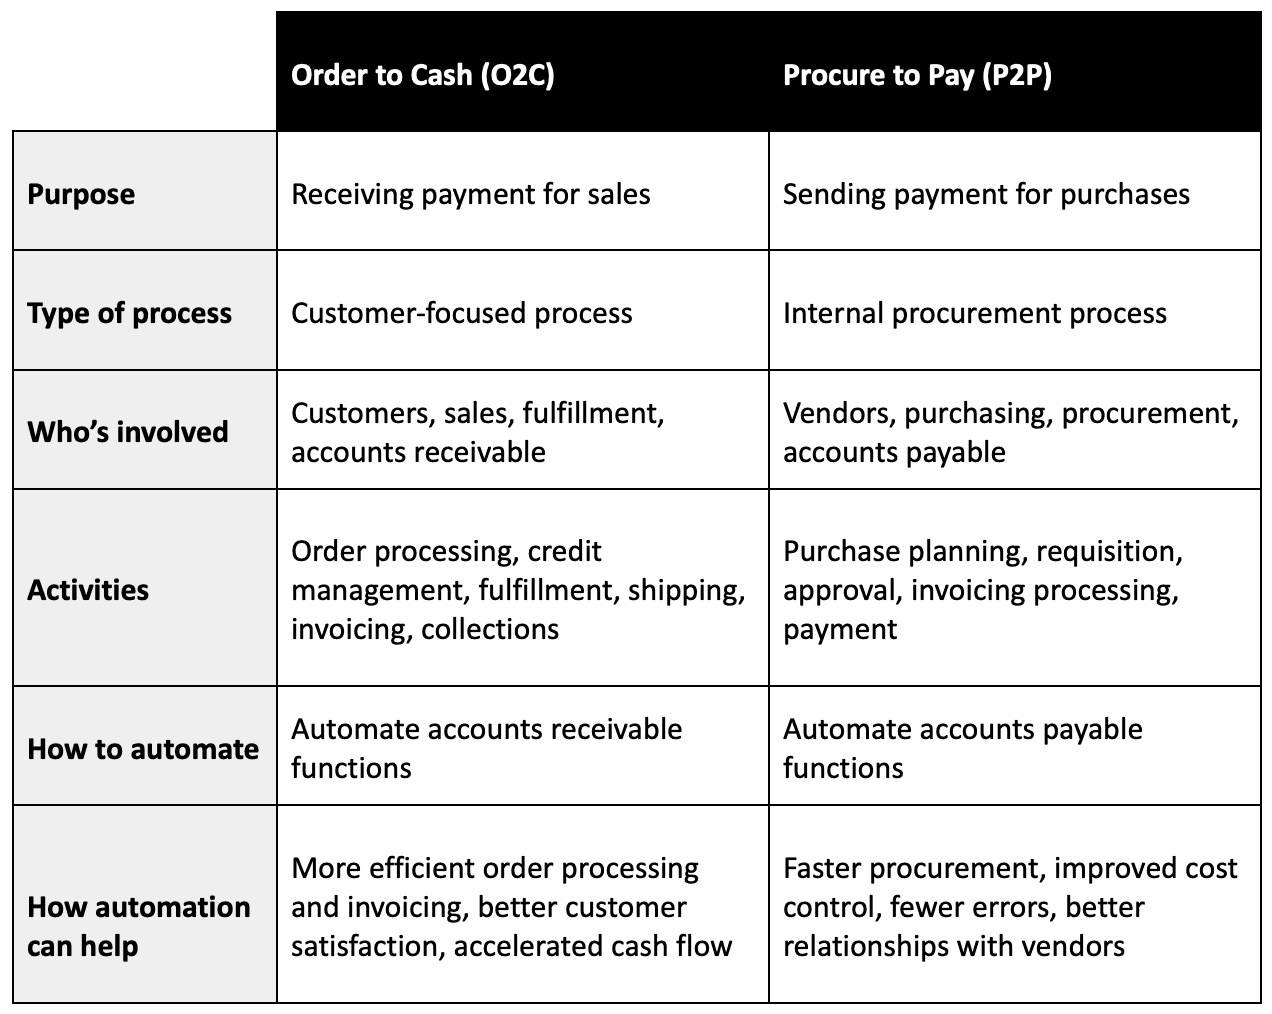 Order to cash vs procure to pay: the differences